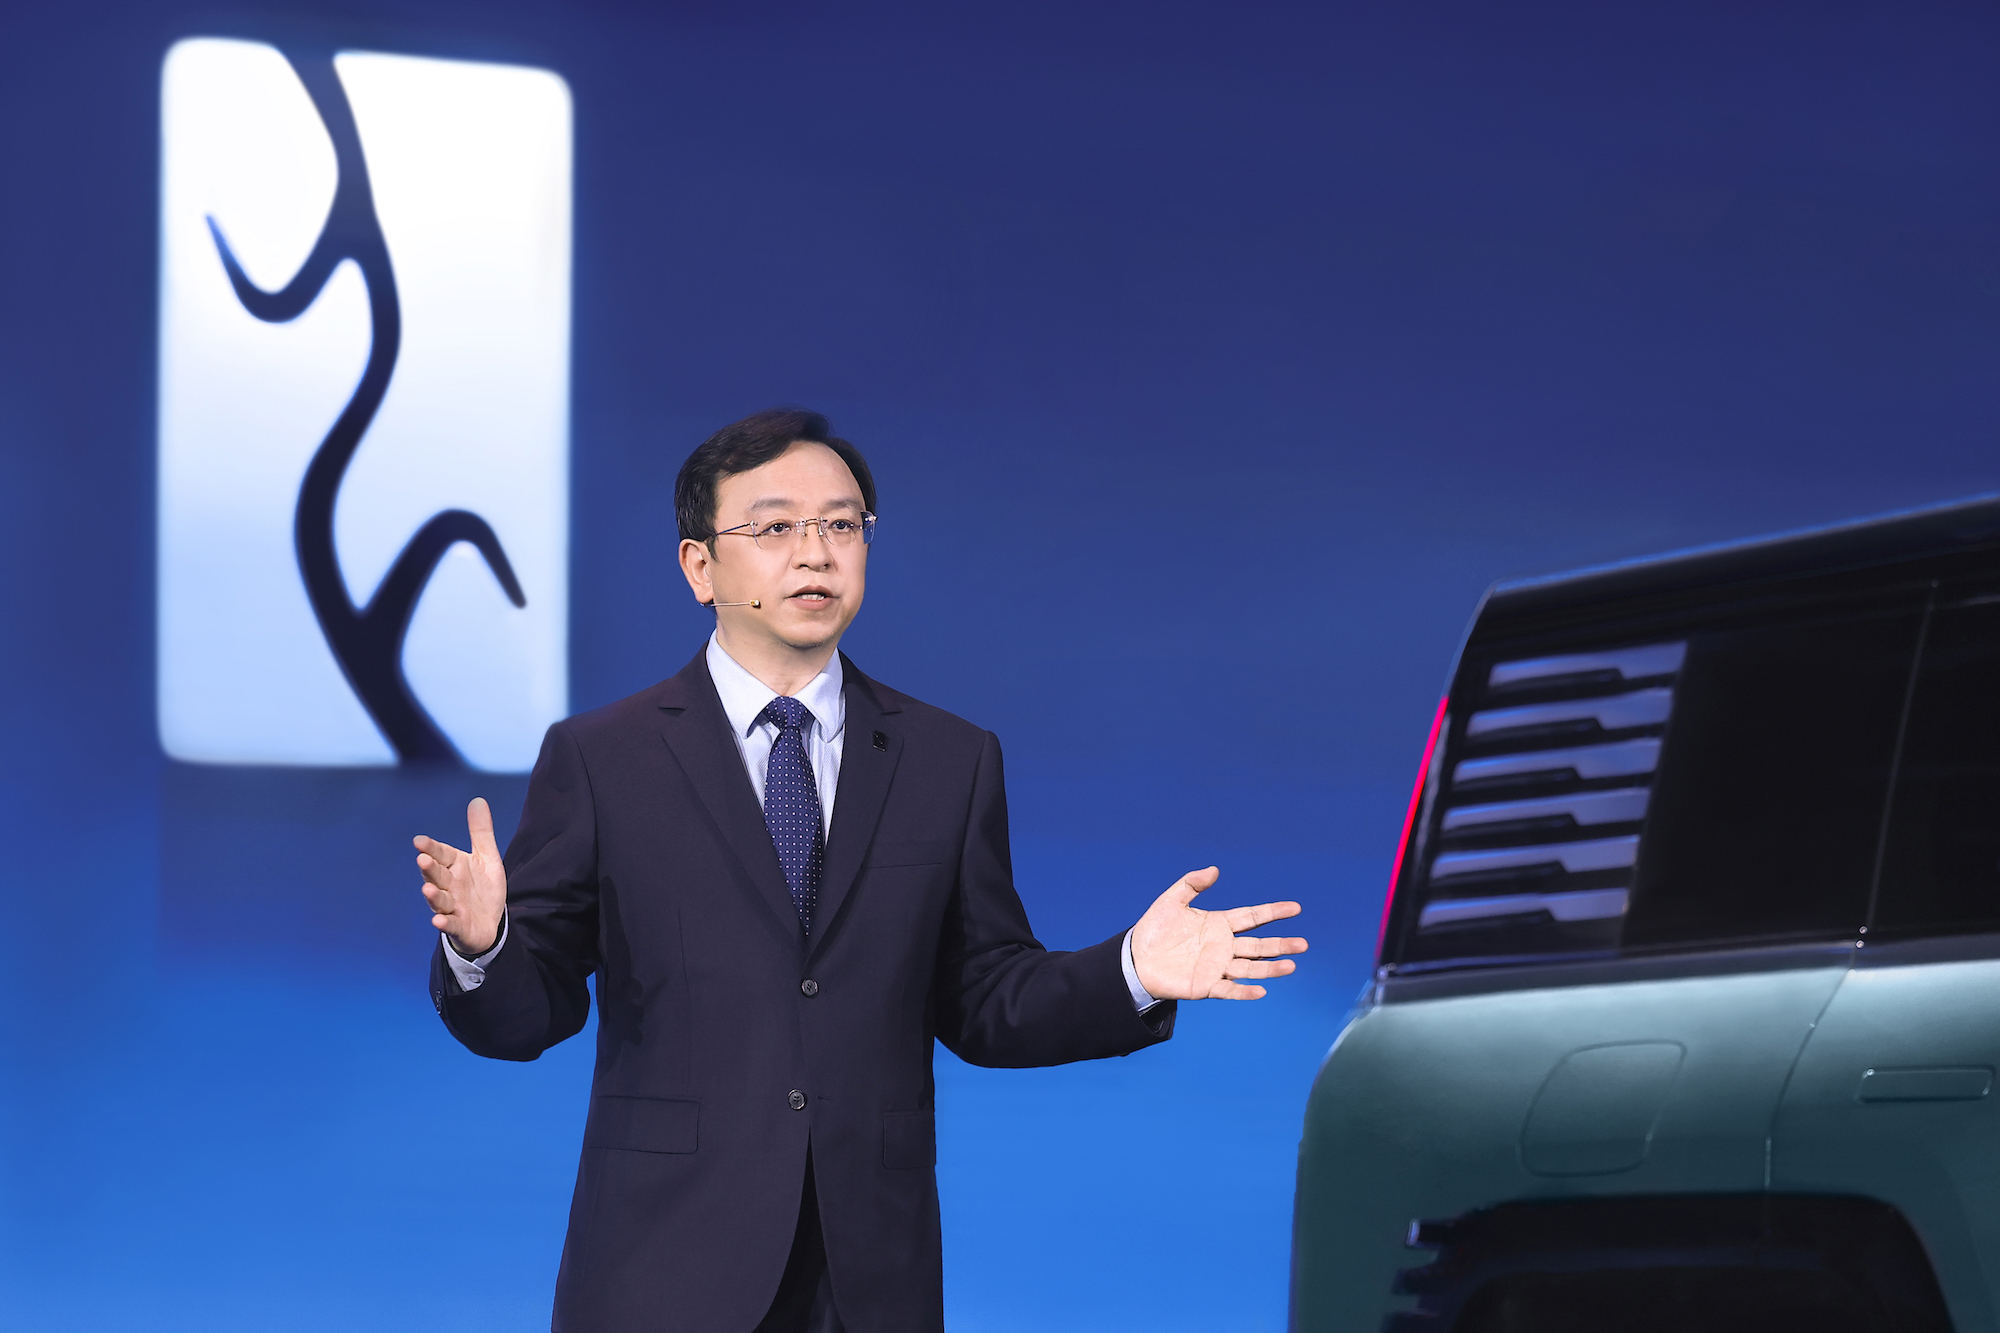 Founder and CEO of BYD, Wang Chuanfu